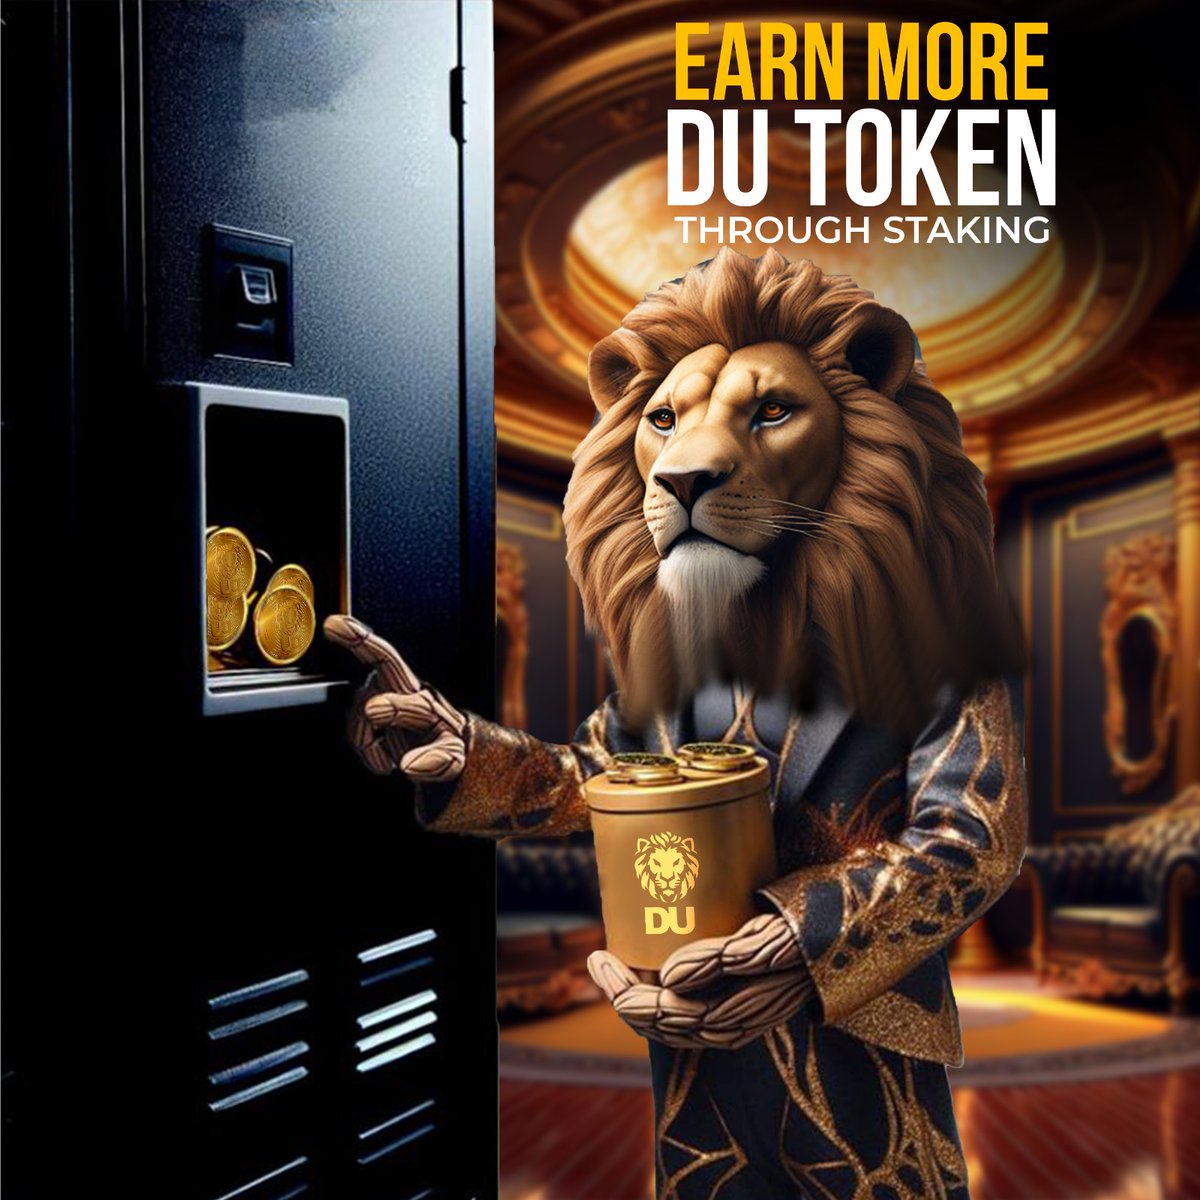 Unlock the power of passive income and earn more DU Token through staking! 🚀💰

#DUtoken #Staking #PassiveIncome #FinancialFreedom #CryptoInvesting #GrowYourWealth #InvestmentOpportunity #Empowerment #FutureFinance #investwisely #invest #CryptoSwap #stakeearn #staketoelevate